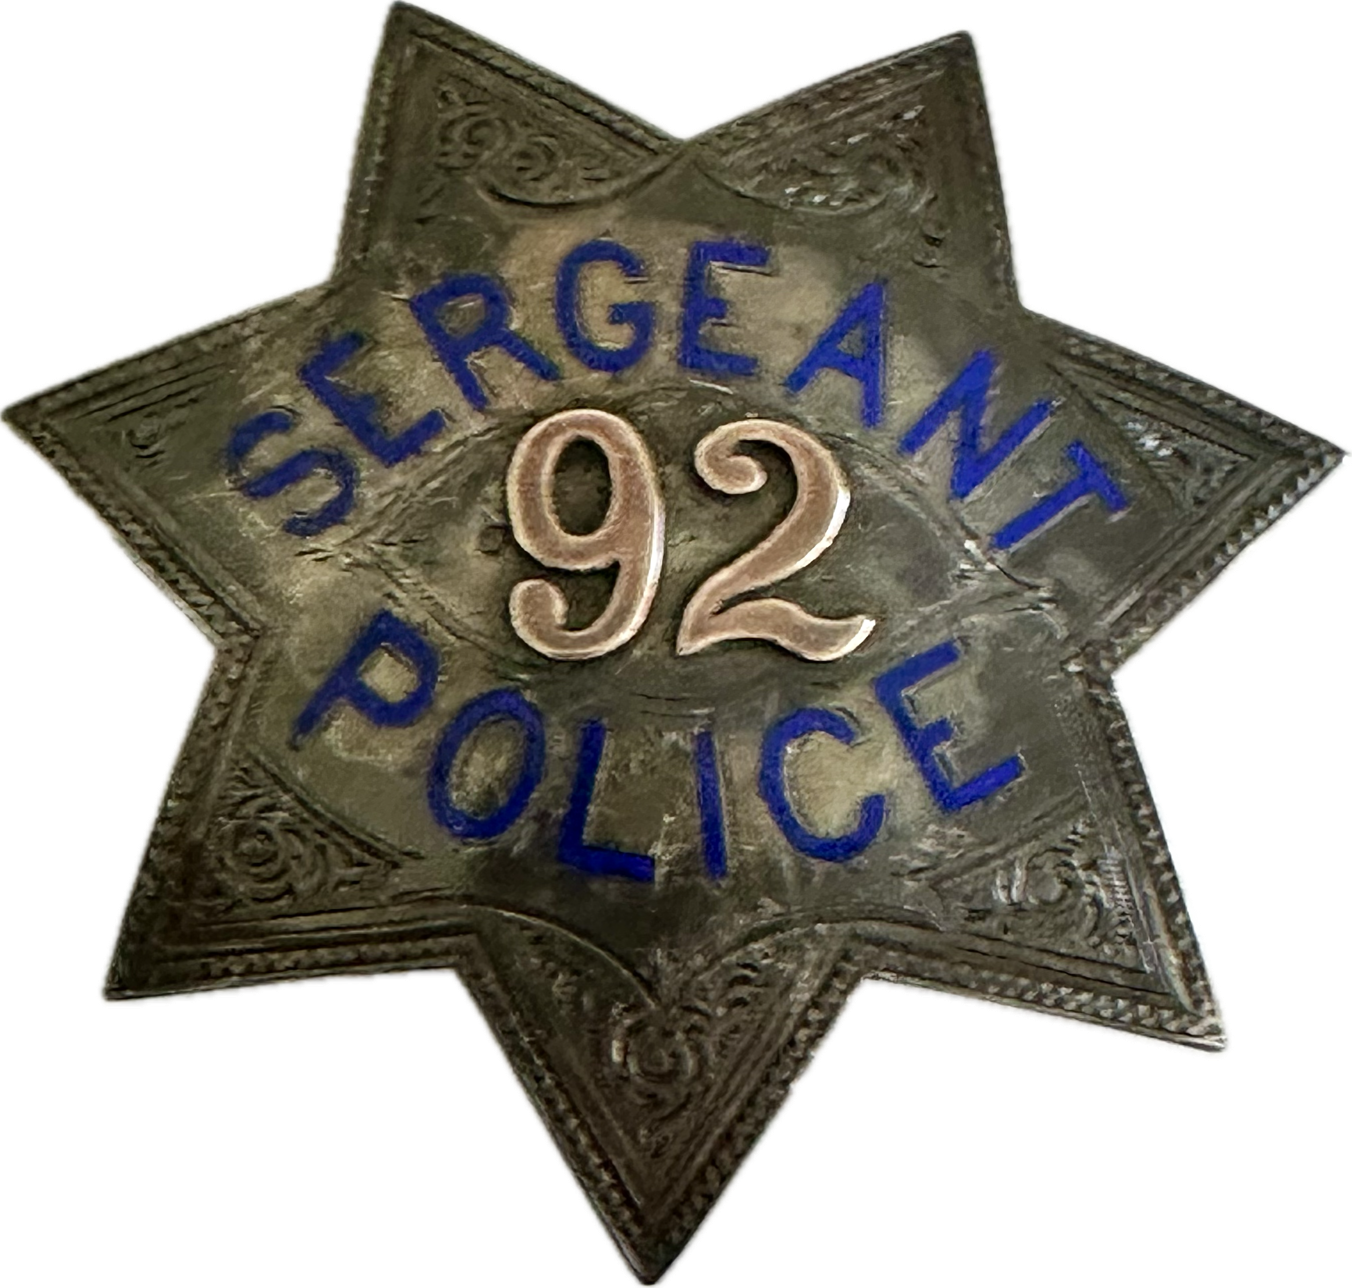 San Francisco Police Sergeant star No. 92 issued to Charles H. McDonald who was appointed a Patrolman on April 14, 1878 and promoted to Sergeant December 1895.  The star is 3 5/16” tall. Sterling silver with hard fired blue enamel lettering and 14k applied gold numbers.